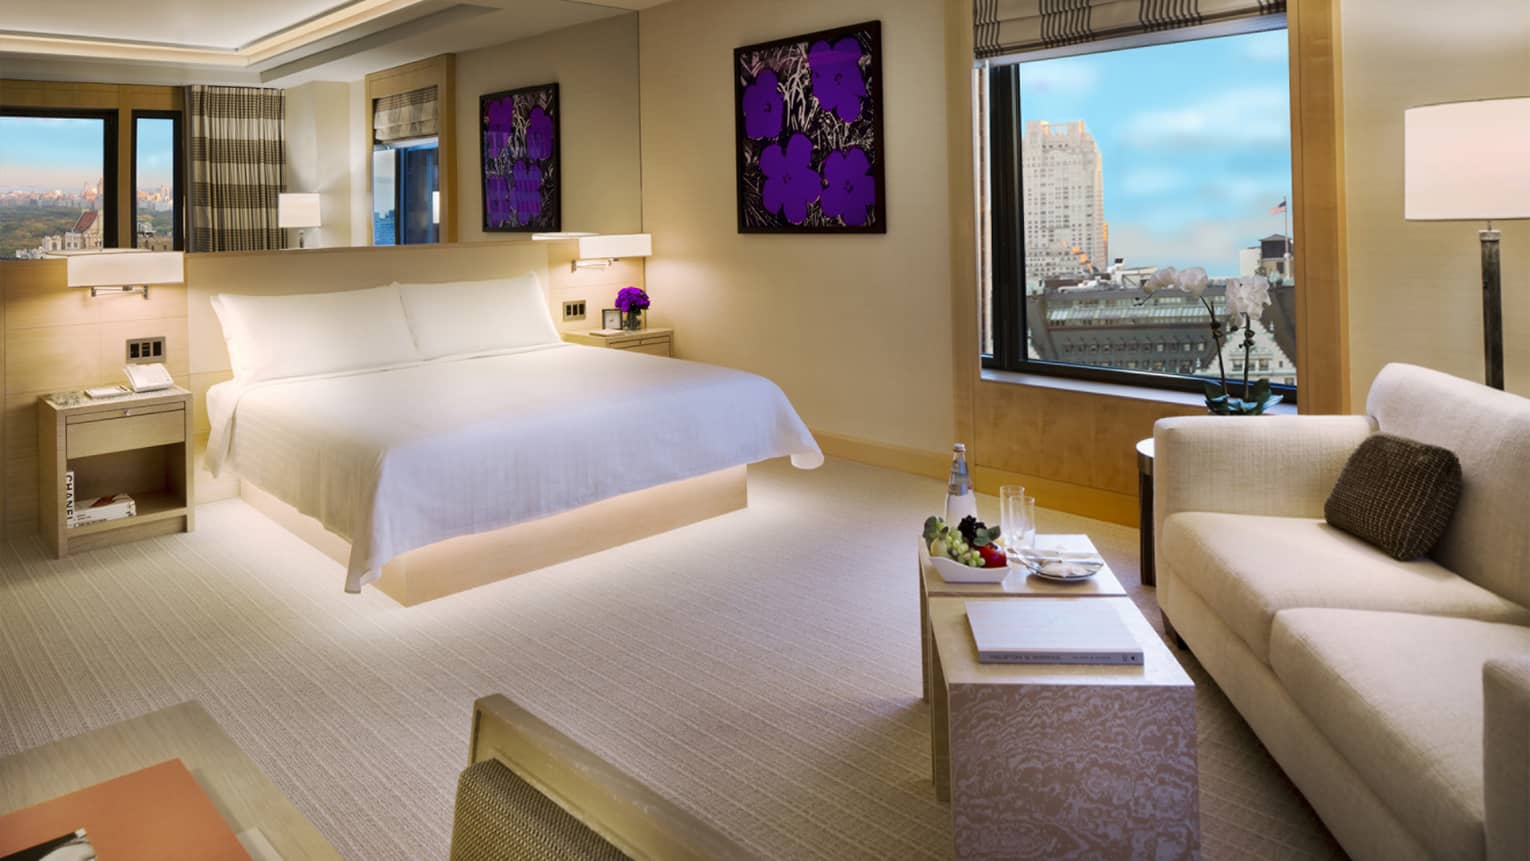 Modern Manhattan Junior Suite with framed purple flower print, white bed, sofa, window with park view